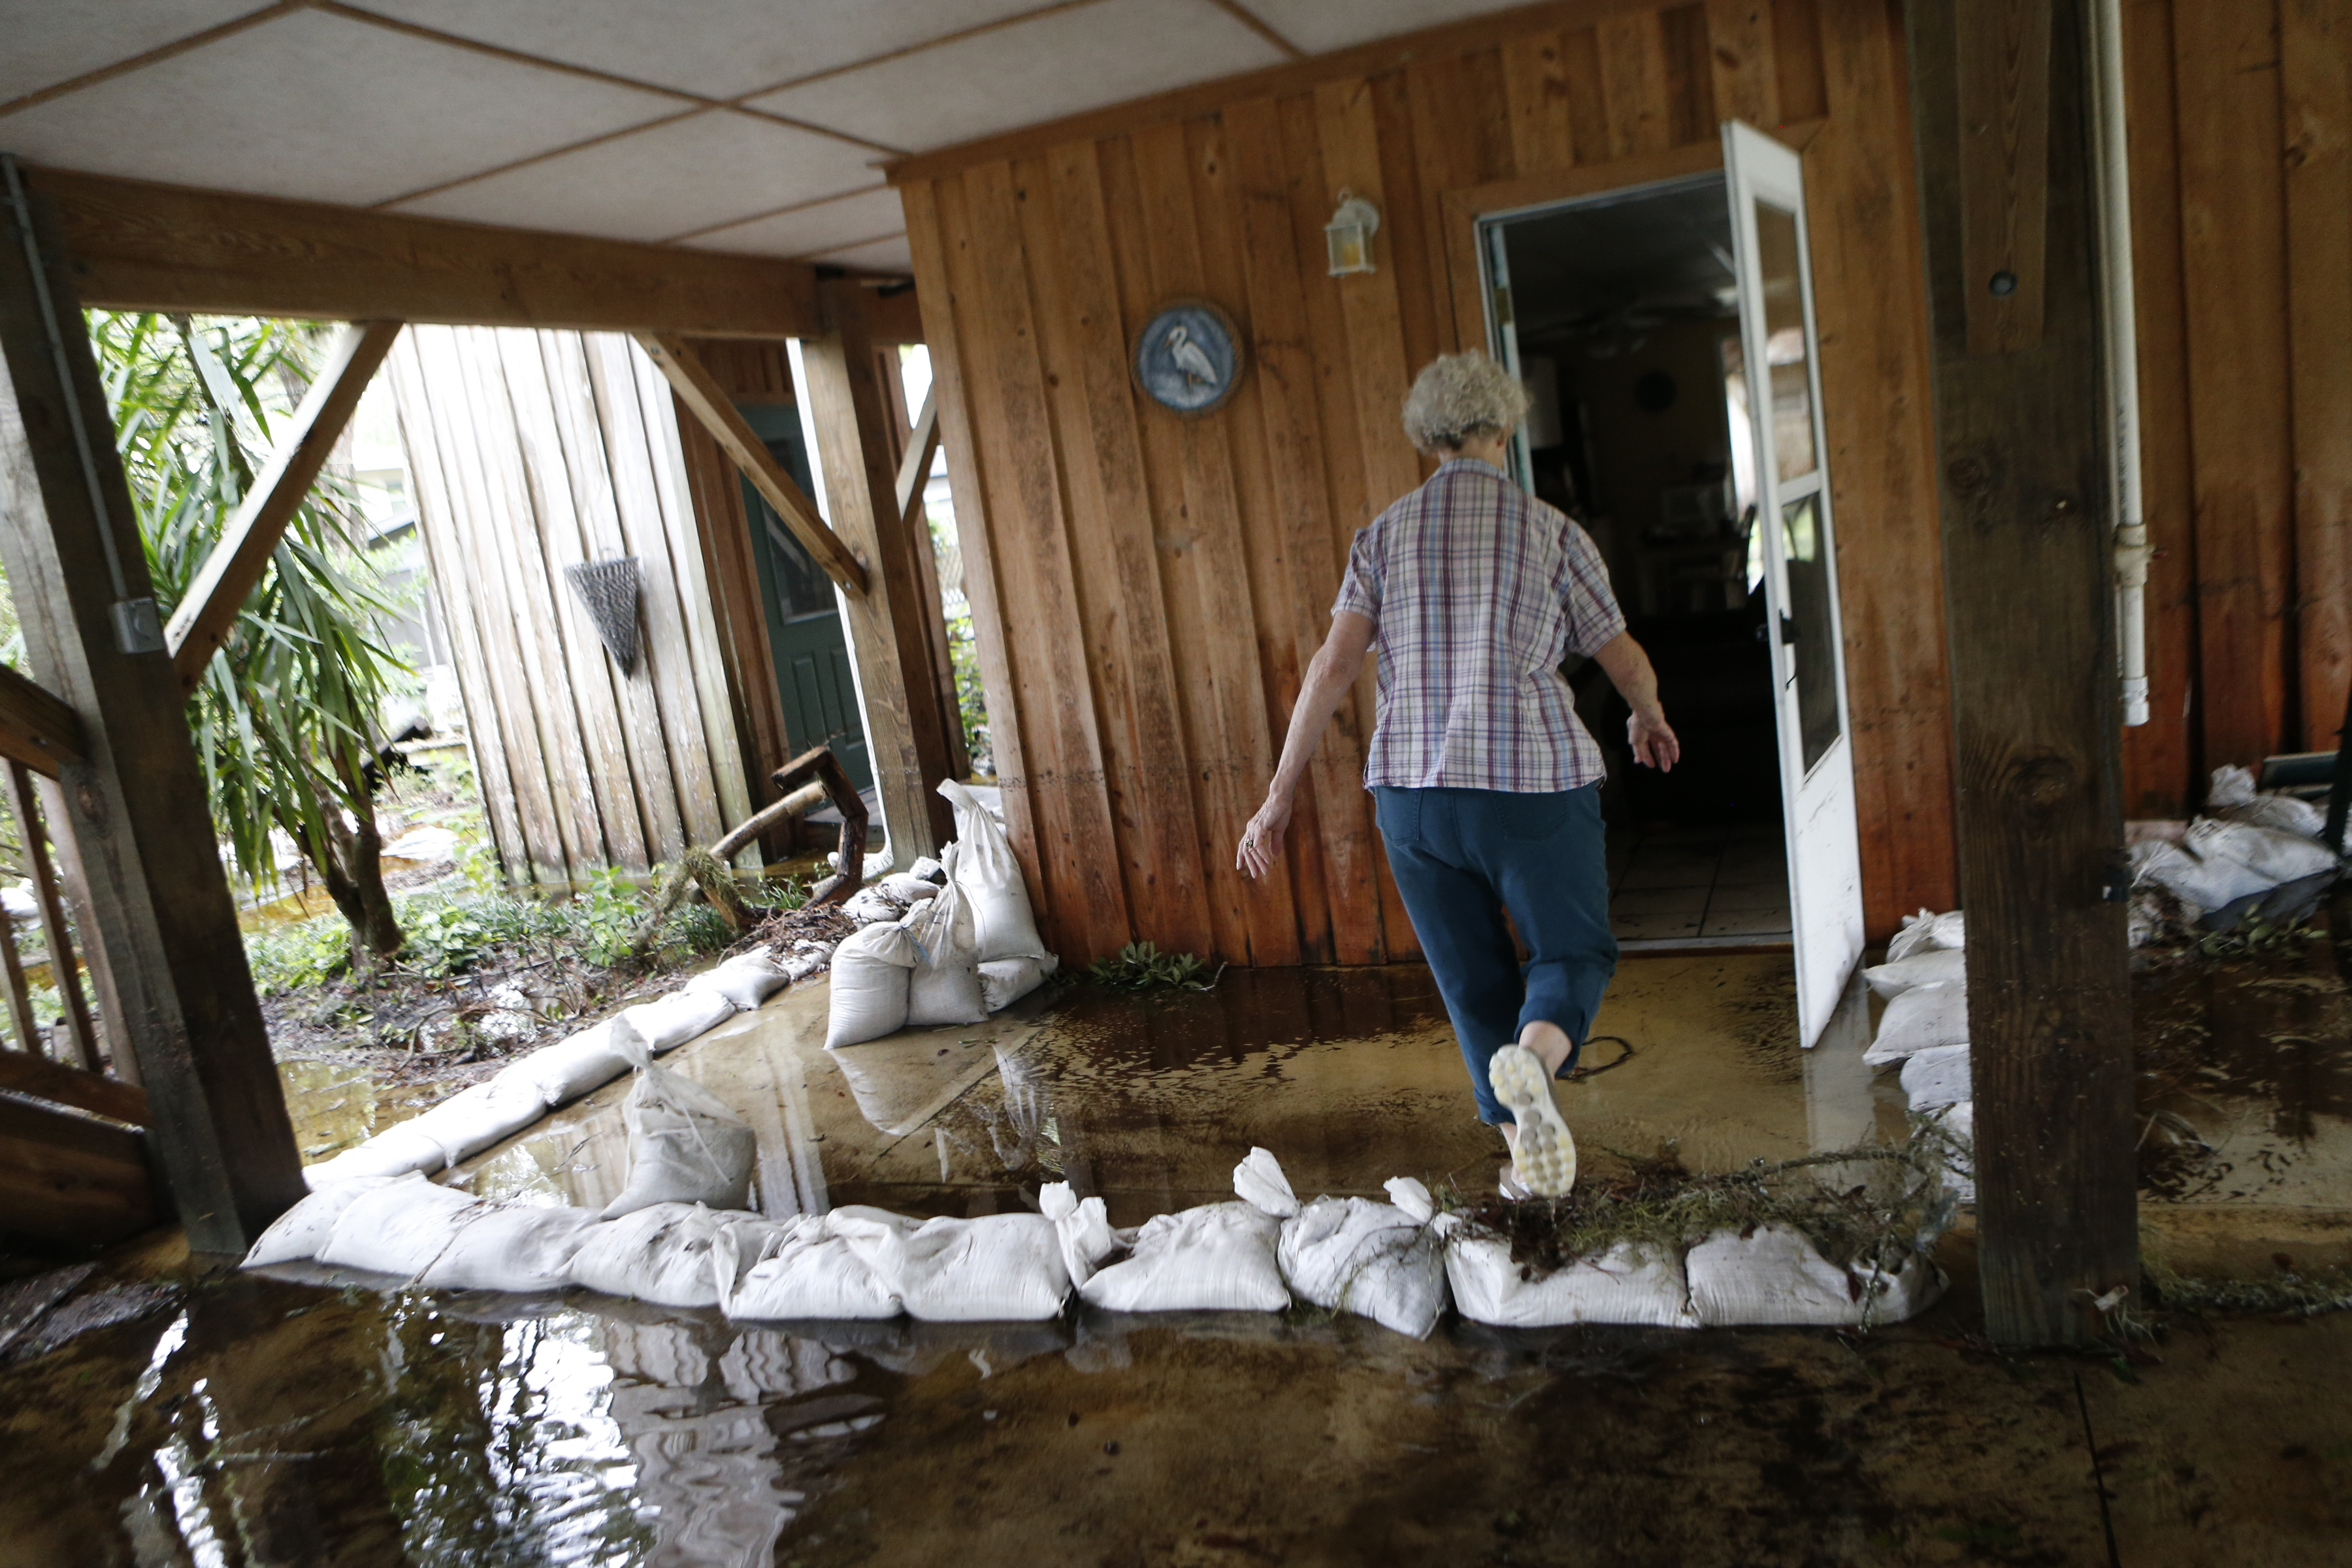 ST MARKS, FL - SEPTEMBER 2: Barbara Carroll surveys damage in and around her home from storm surge associated with Hurricane Hermine which made landfall overnight in the area on September 2, 2016 in St. Marks, Florida. Hermine made landfall as a Category 1 hurricane but has weakened back to a tropical storm.